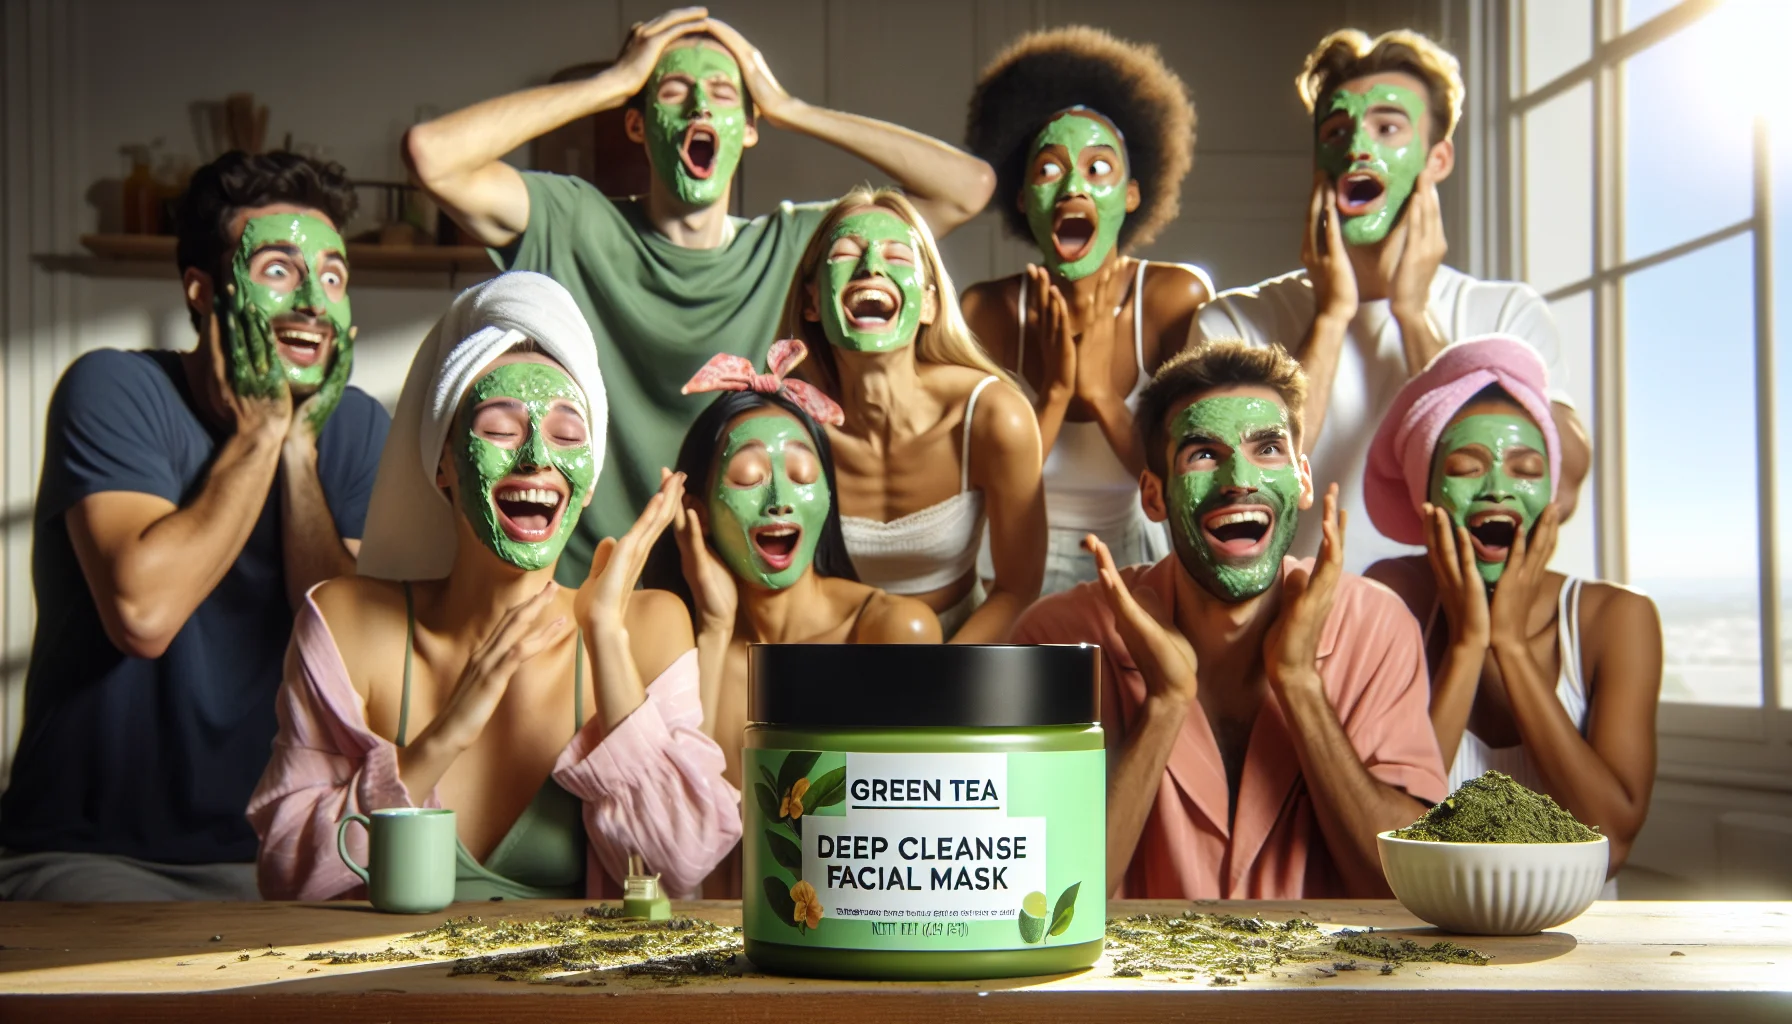 Imagine a comedic scene that brings a smile to your face. In the center of this scene is a vibrant, beautifully designed green tea deep cleanse facial mask jar. Around the jar, a group of mixed descent individuals of varying ages and genders are applying the mask. Each individual is reacting humorously to their newfound green faces while others struggle to suppress their laughter. The setting is a light, airy, and aesthetically-pleasing room with soft sunlight pouring in, highlighting everyone's glowing green faces. The overall atmosphere should denote fun, relaxation, wellness, and a lighthearted approach to skincare.